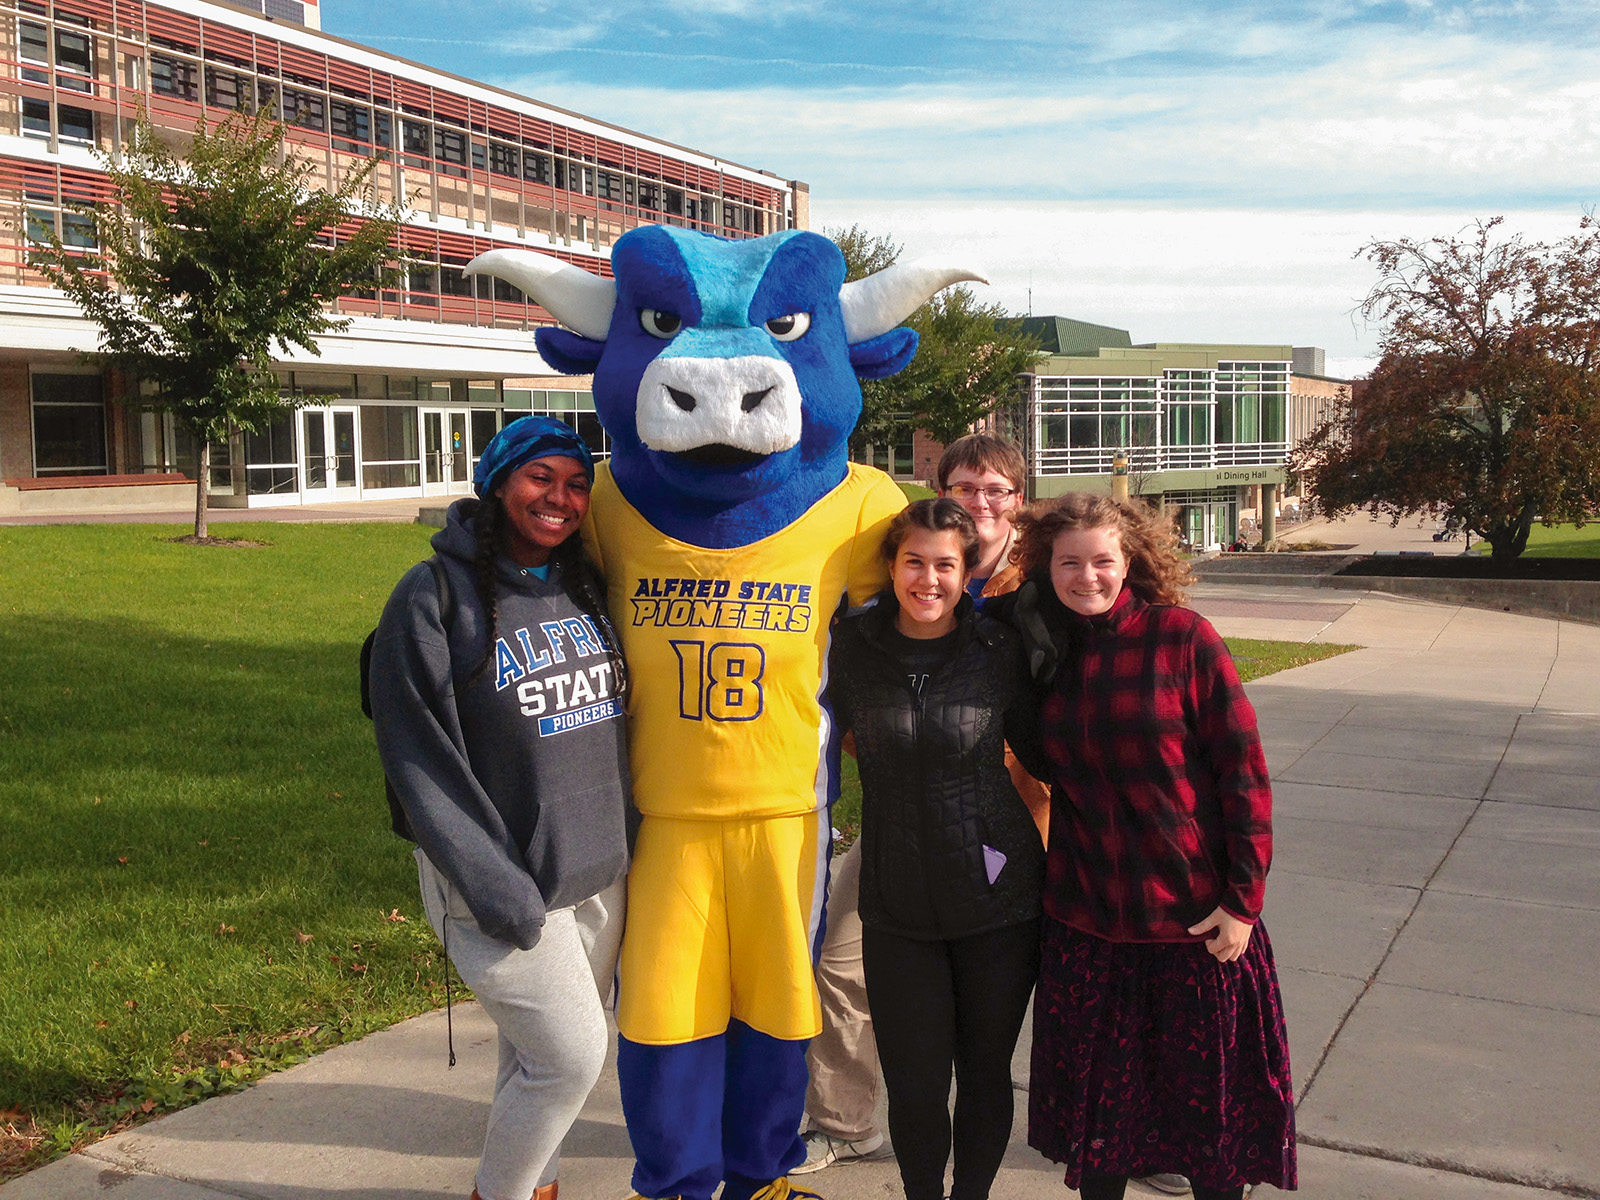 Big Blue ASC mascot standing with students